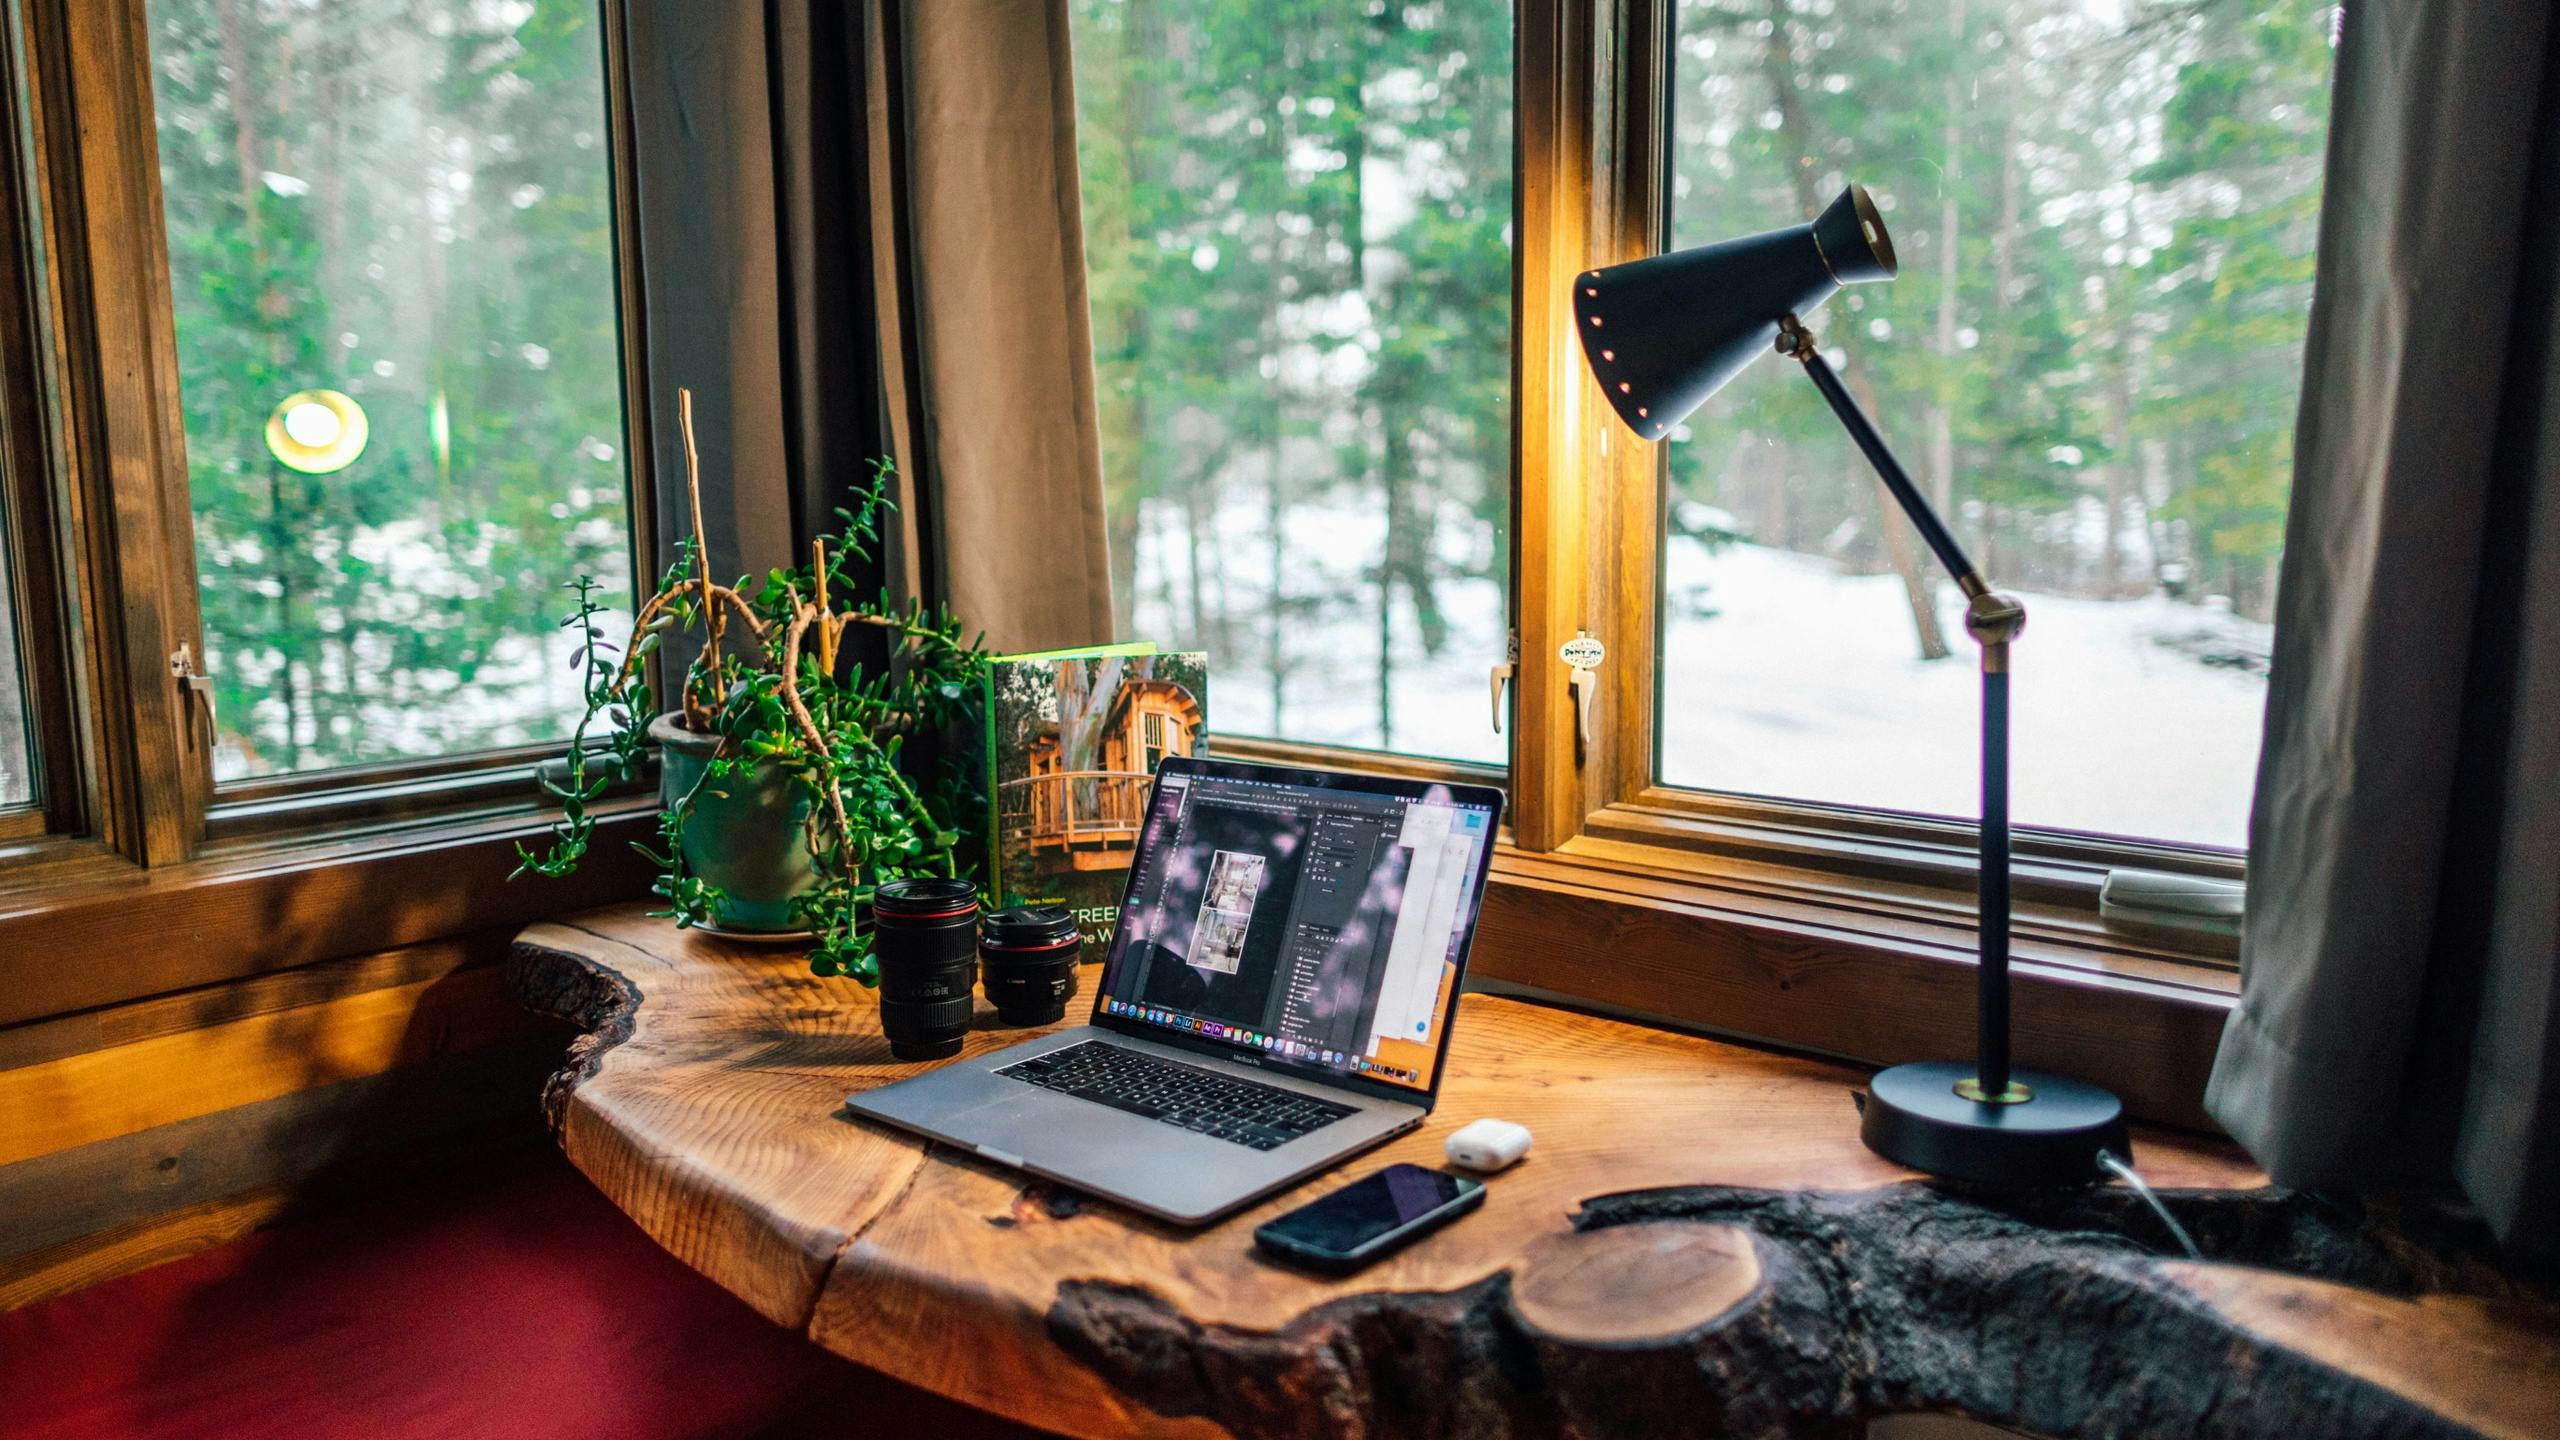 Home office overlooking snowy woods